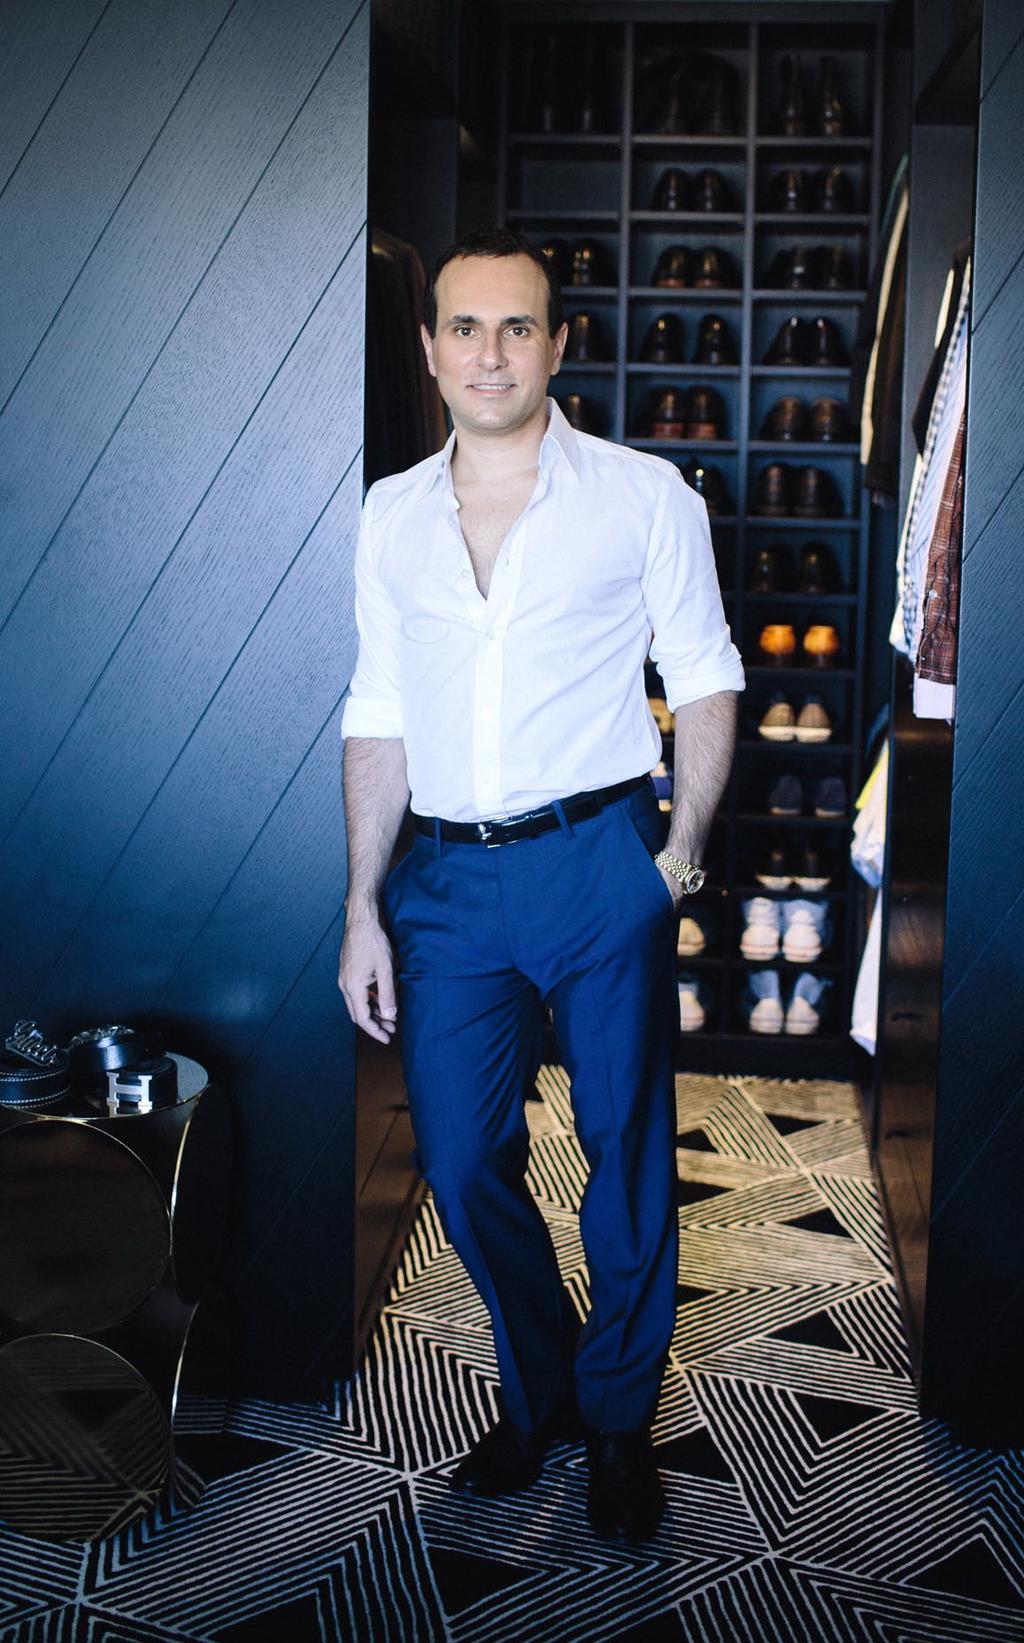 chic closets Interior designer Greg Natale gives Adore Home an exclusive tour of his dark and masculine wardrobe. TELL US ABOUT YOUR WARDROBE. I would call it masculine and ordered.